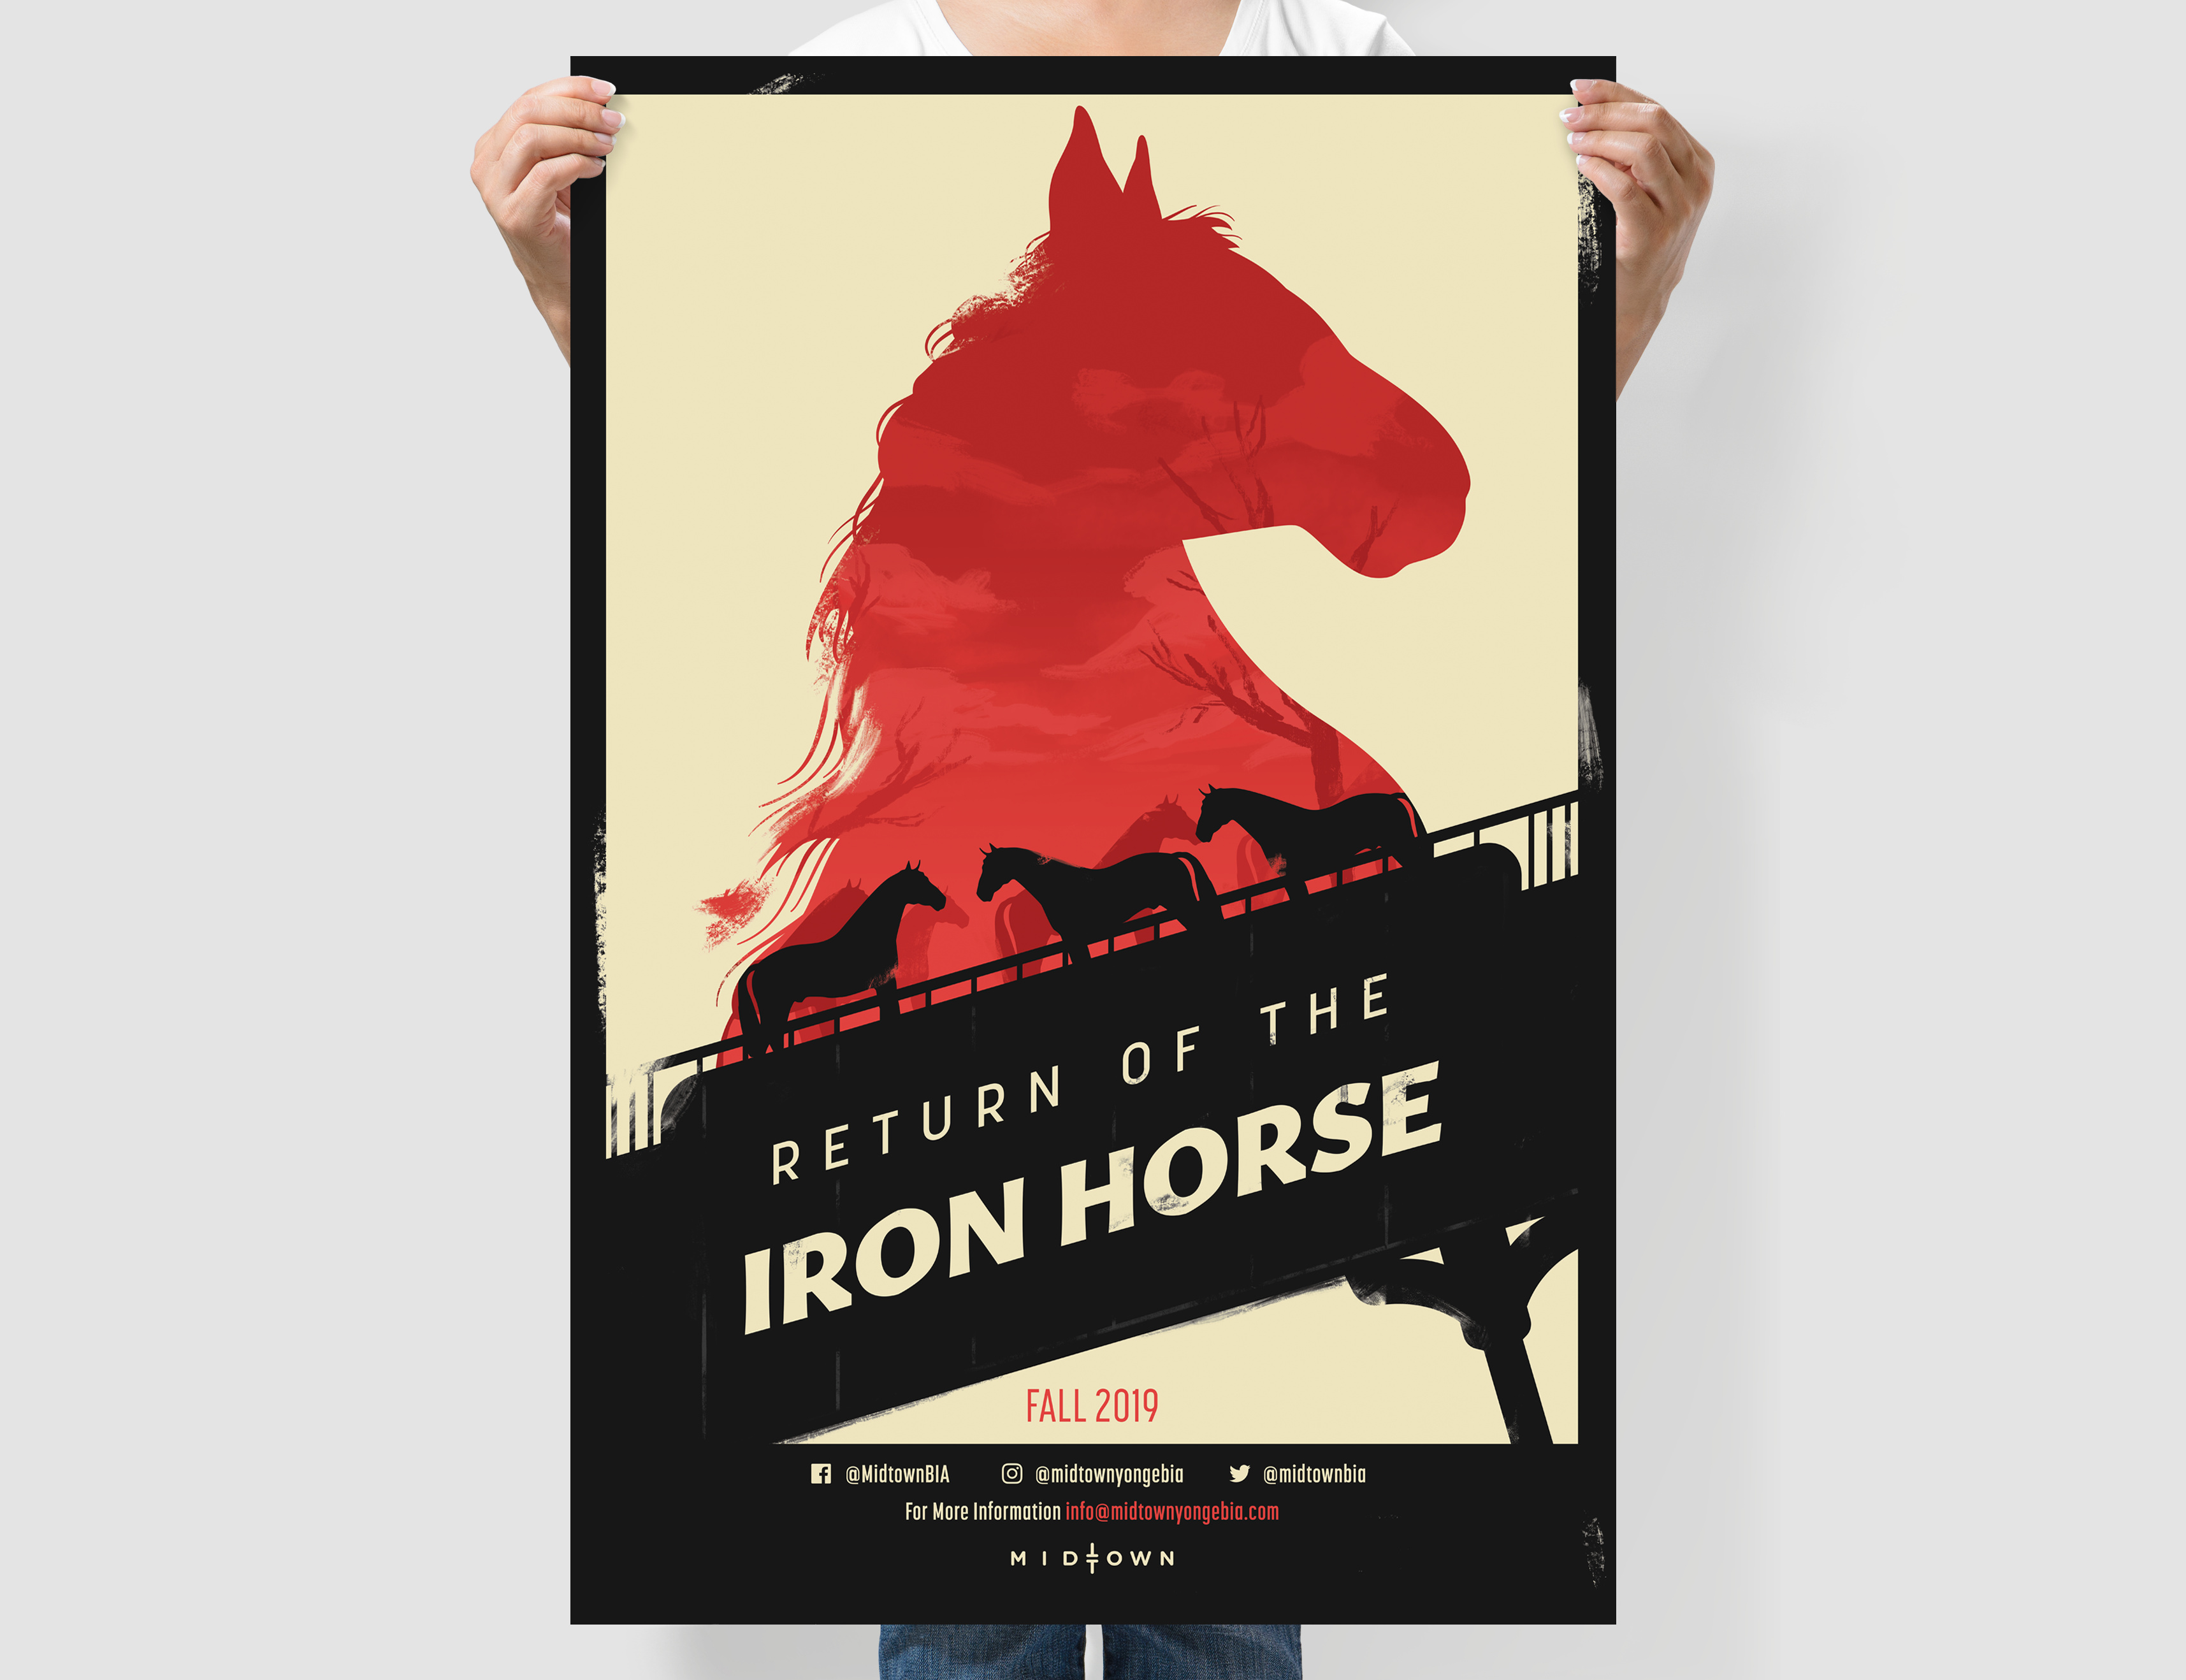 a person holding up custom printed poster of a movie about horses